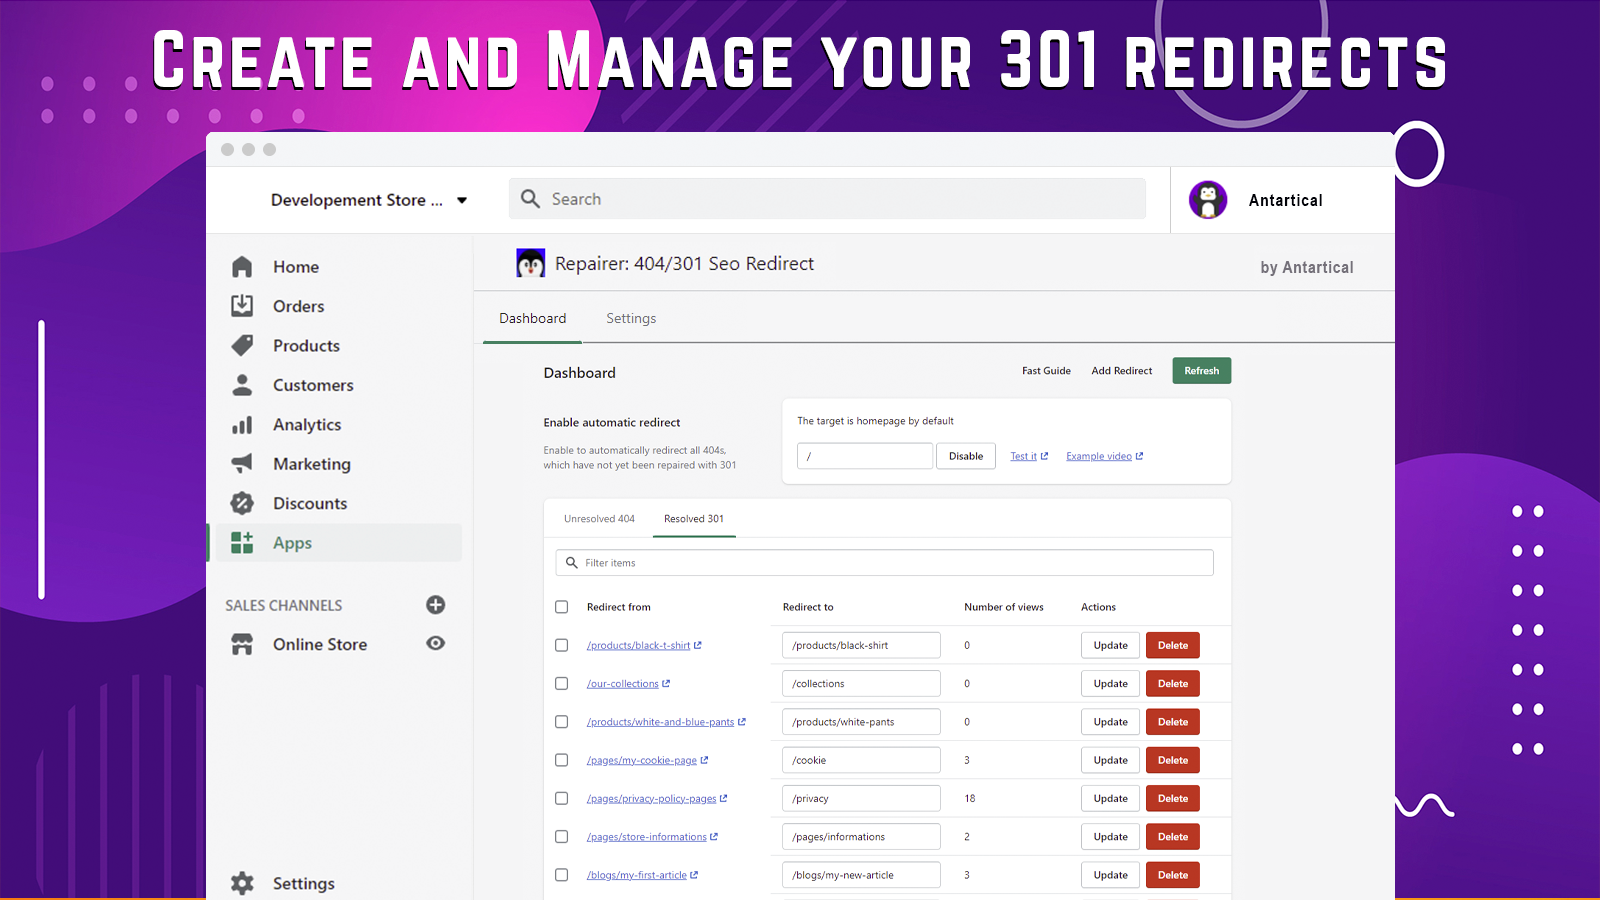 Create and Manage your 301 redirects